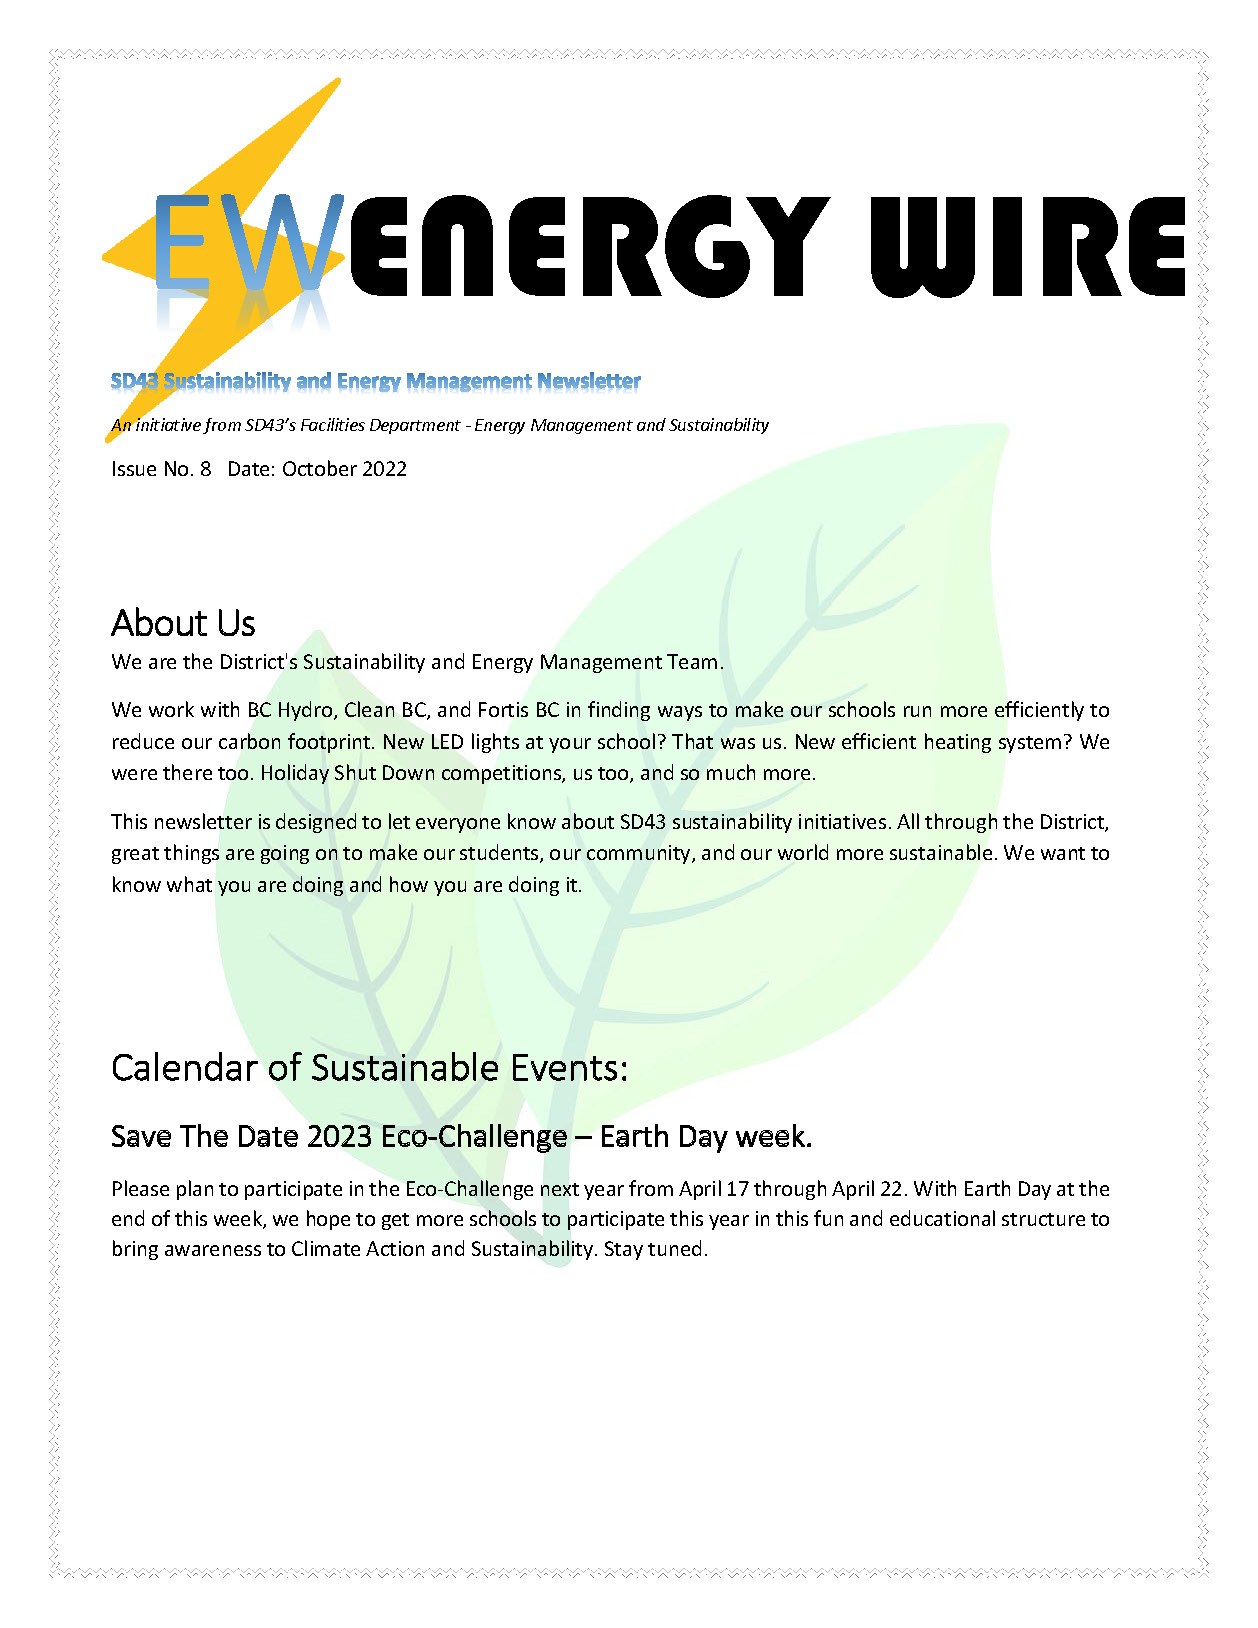 Oct 22 - Energy Wire Newsletter final_Page_1.jpg